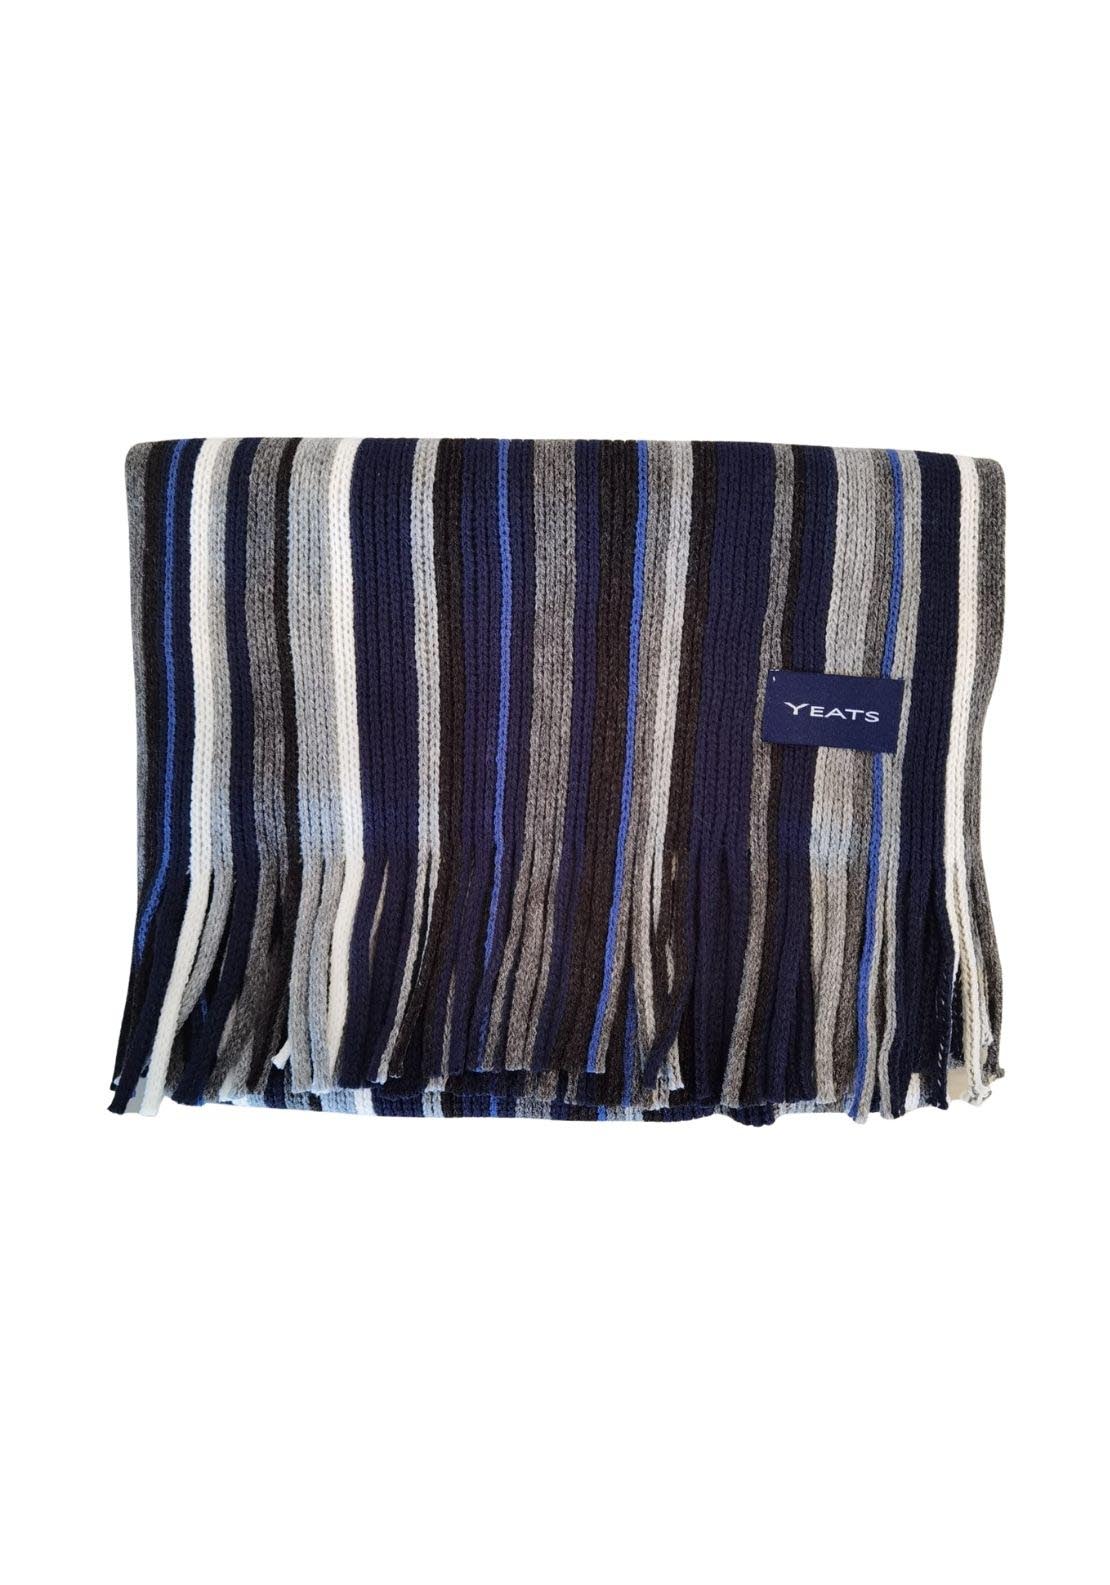 Yeats Boxed Raschel Scarf - Grey / Blue 3 Shaws Department Stores